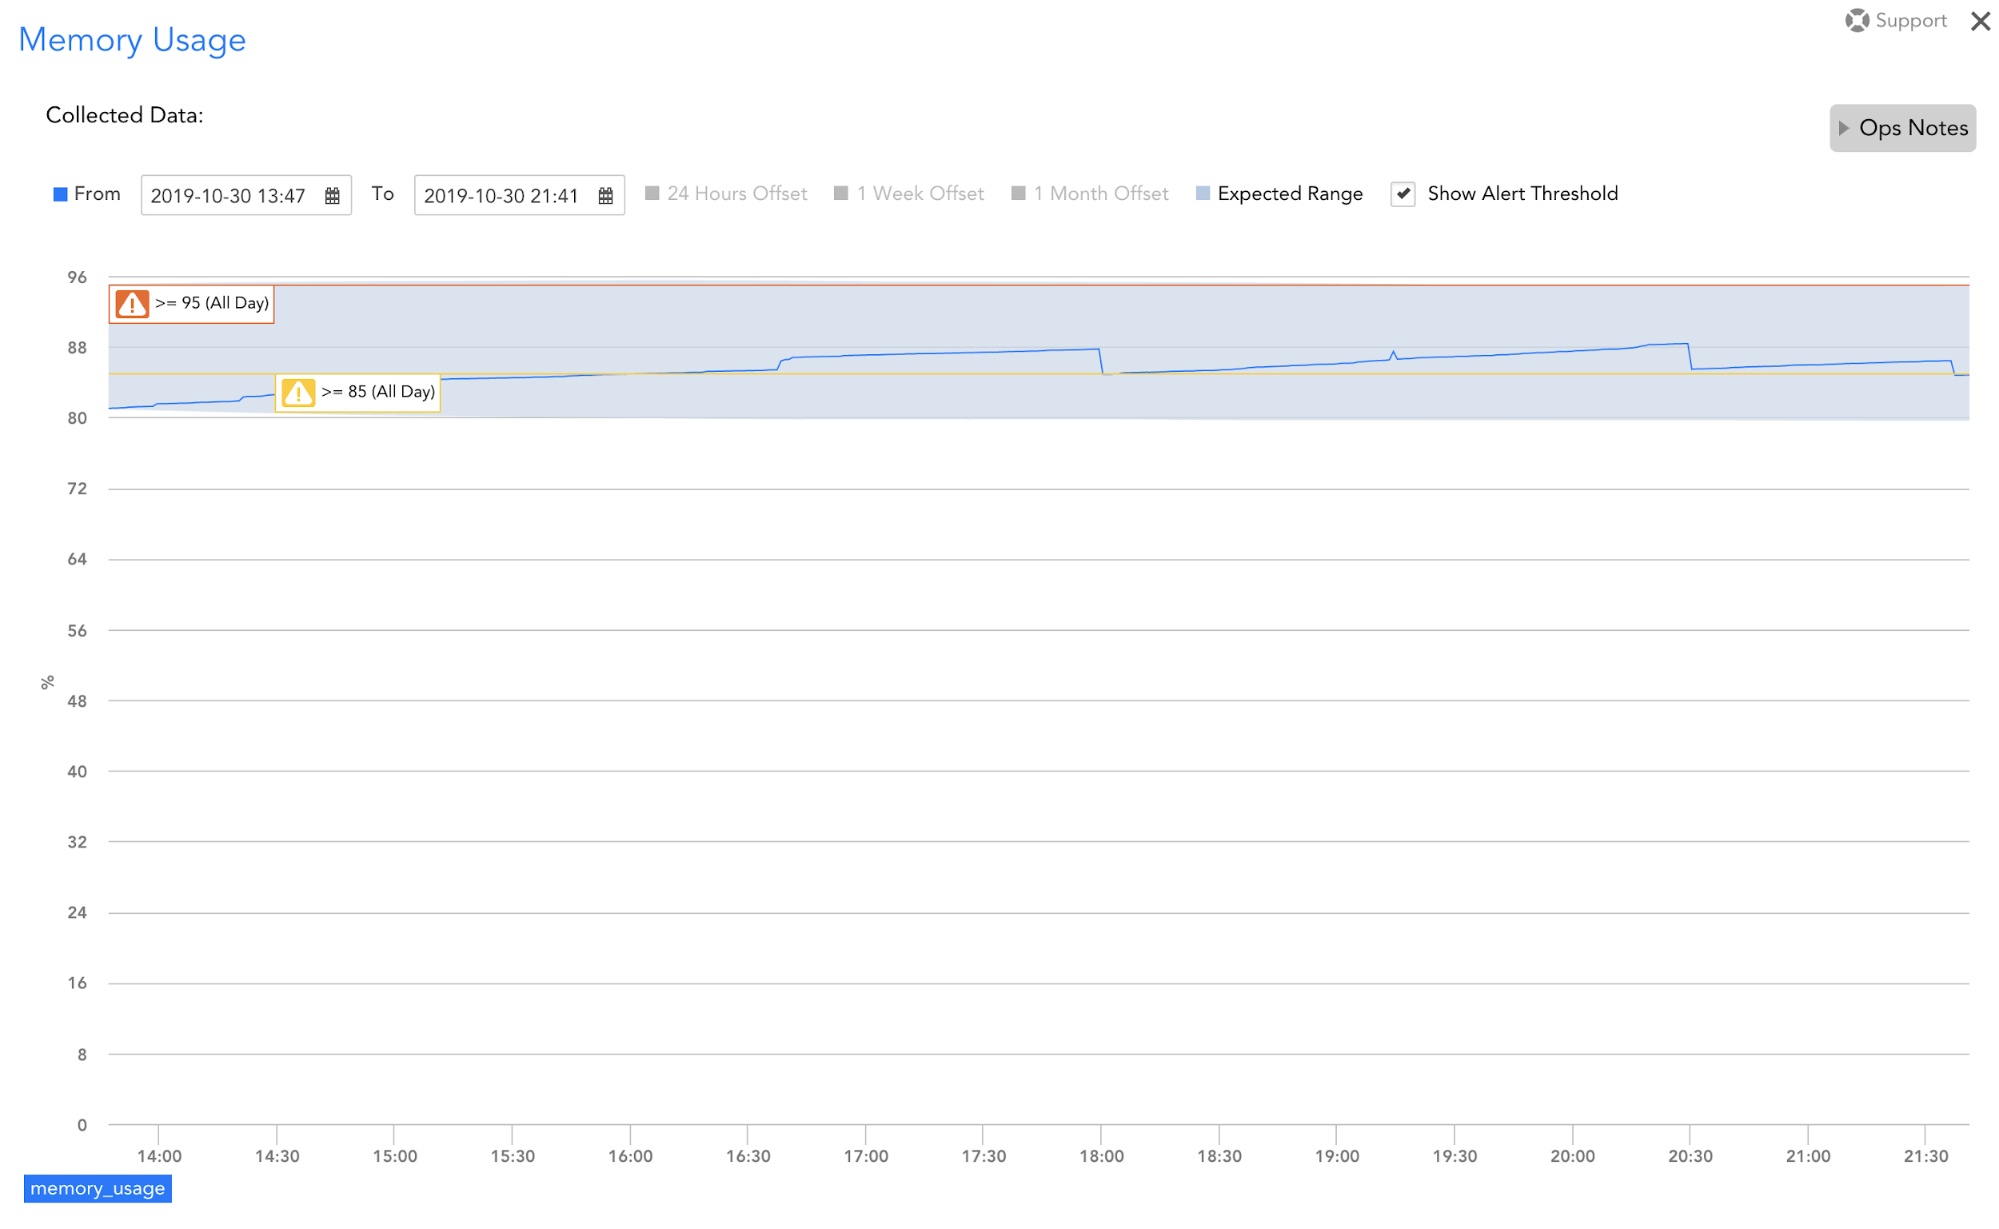 Showing Memory Usage and setting the alert threshold within the LogicMonitor Platform